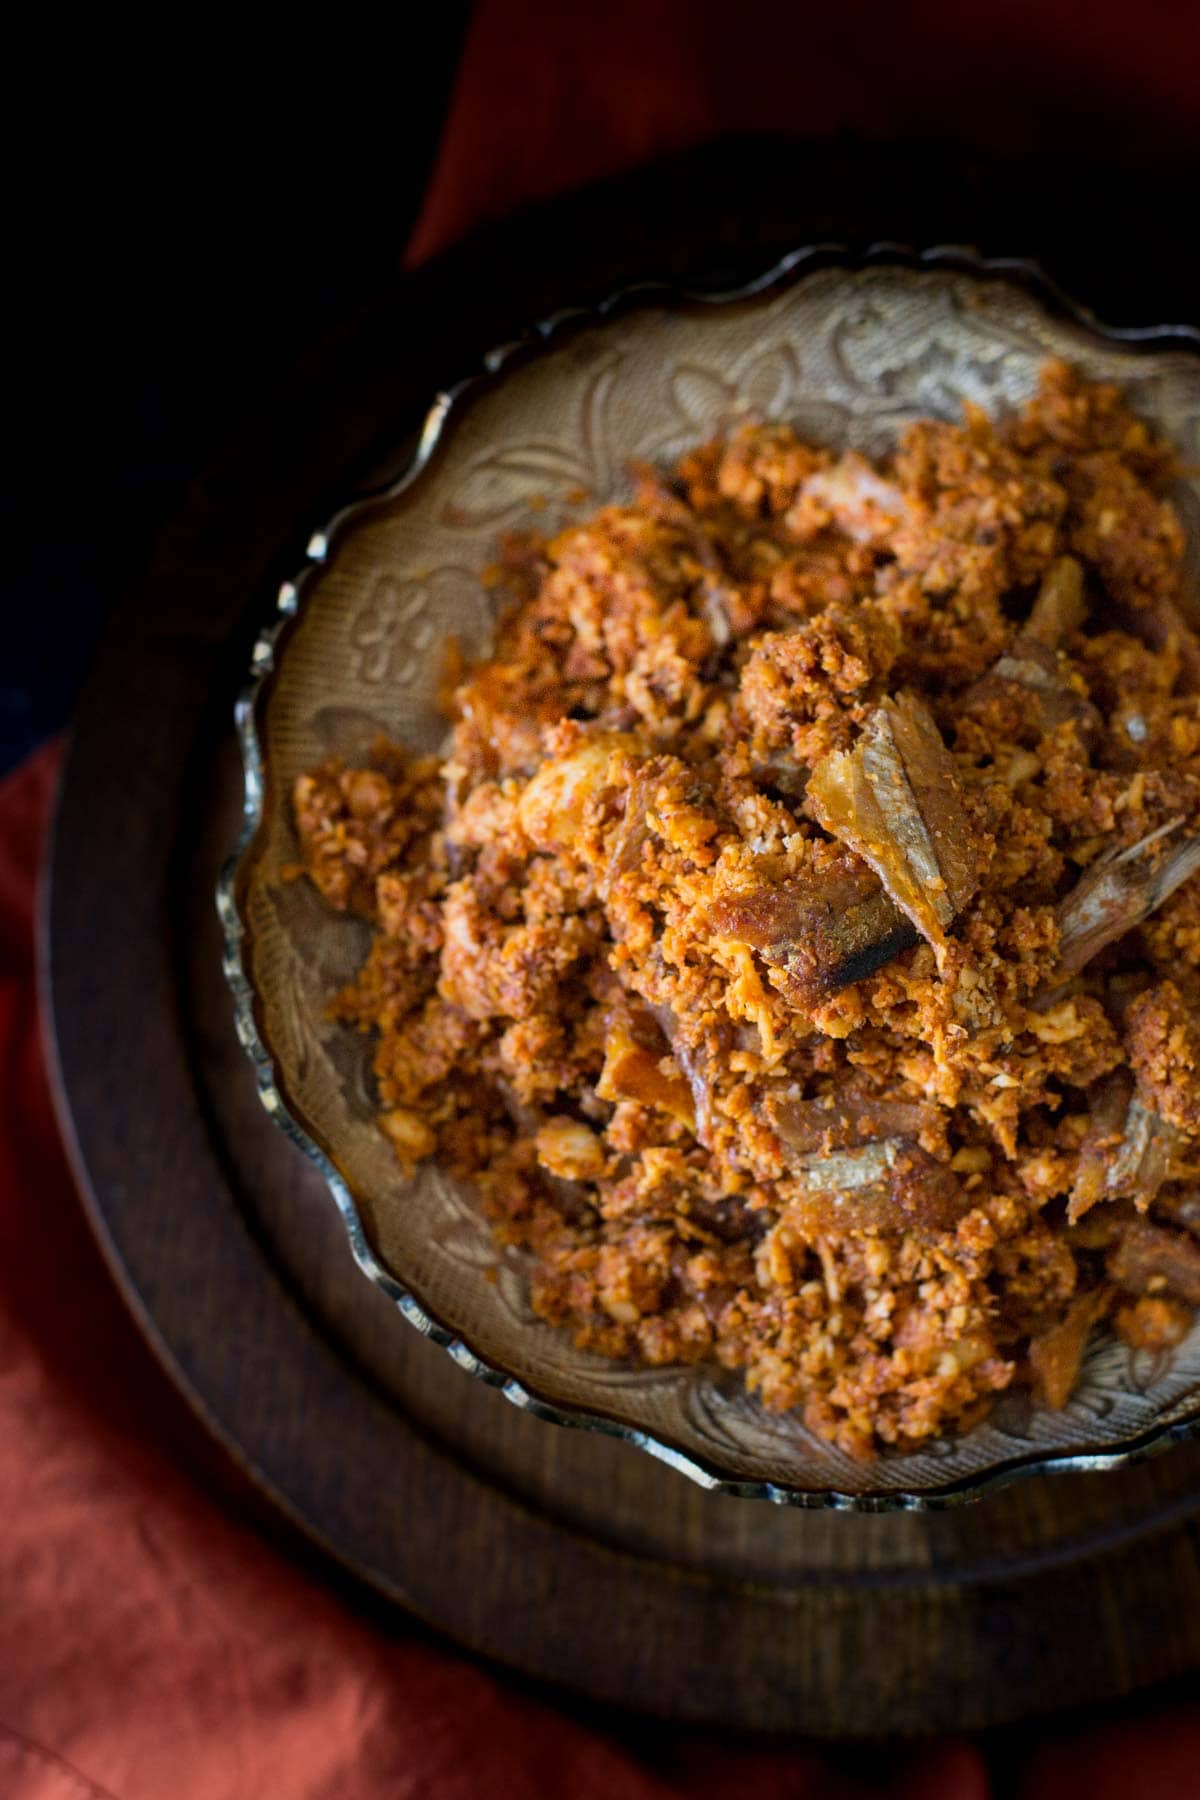 If you have loved fish cuisine in all its different forms, this easy-to-prepare tangy dried fish (or meen) chutney will be a welcome addition to your staple diet. Fish chutney paired with the nutritious Ganji (brown rice porridge or gruel) is comfort food at its best.